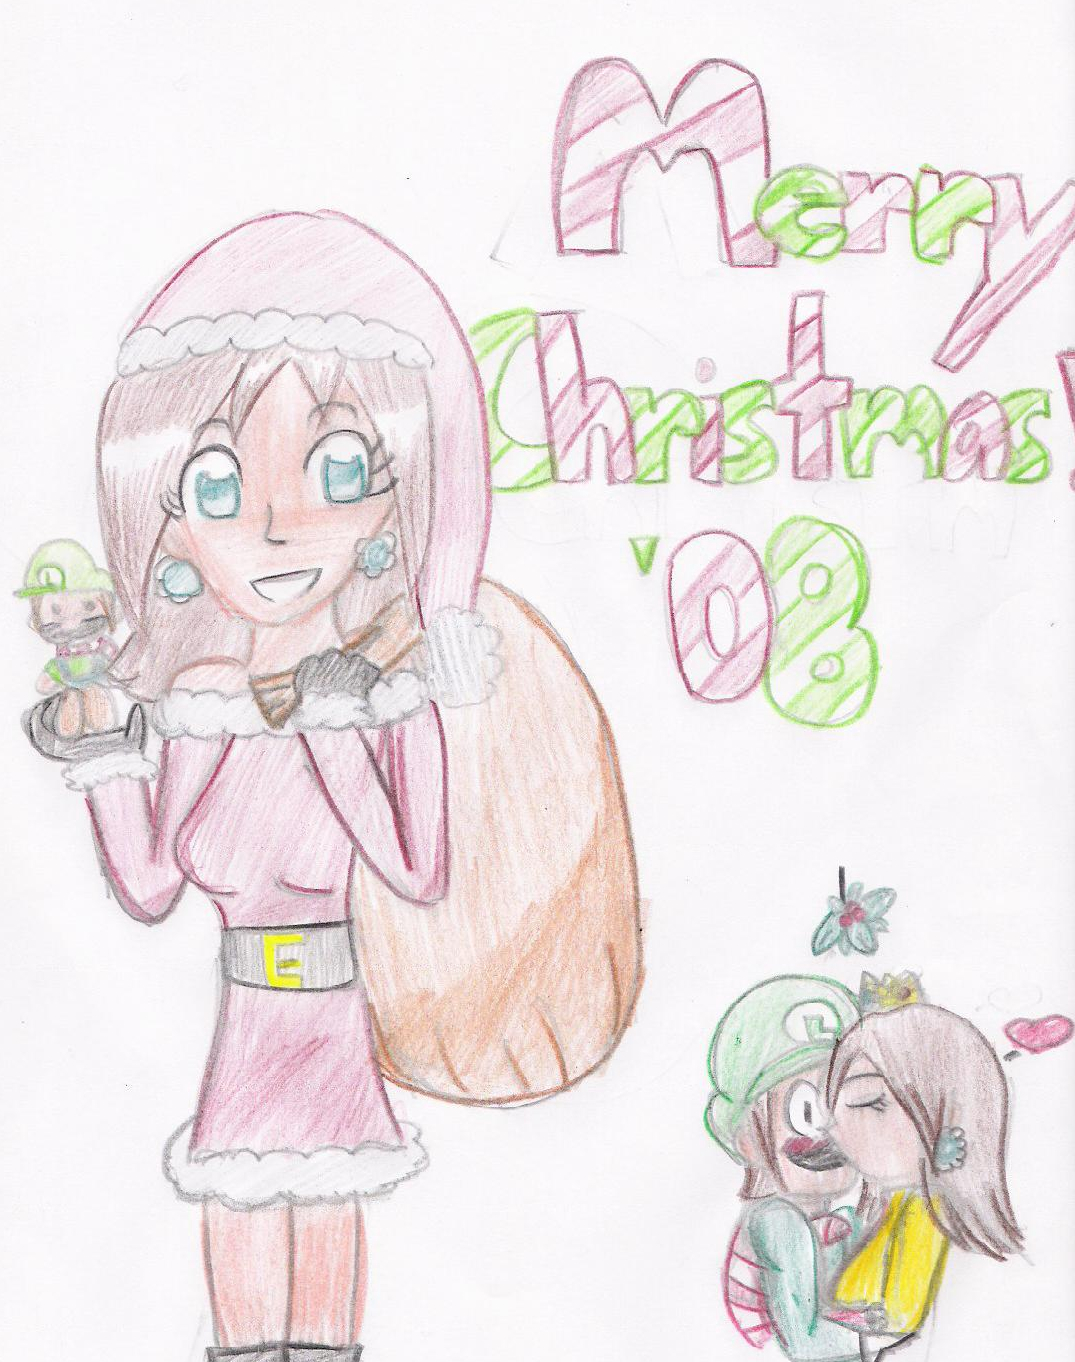 We wish you a Daisy Christmas! by tipsygirl945